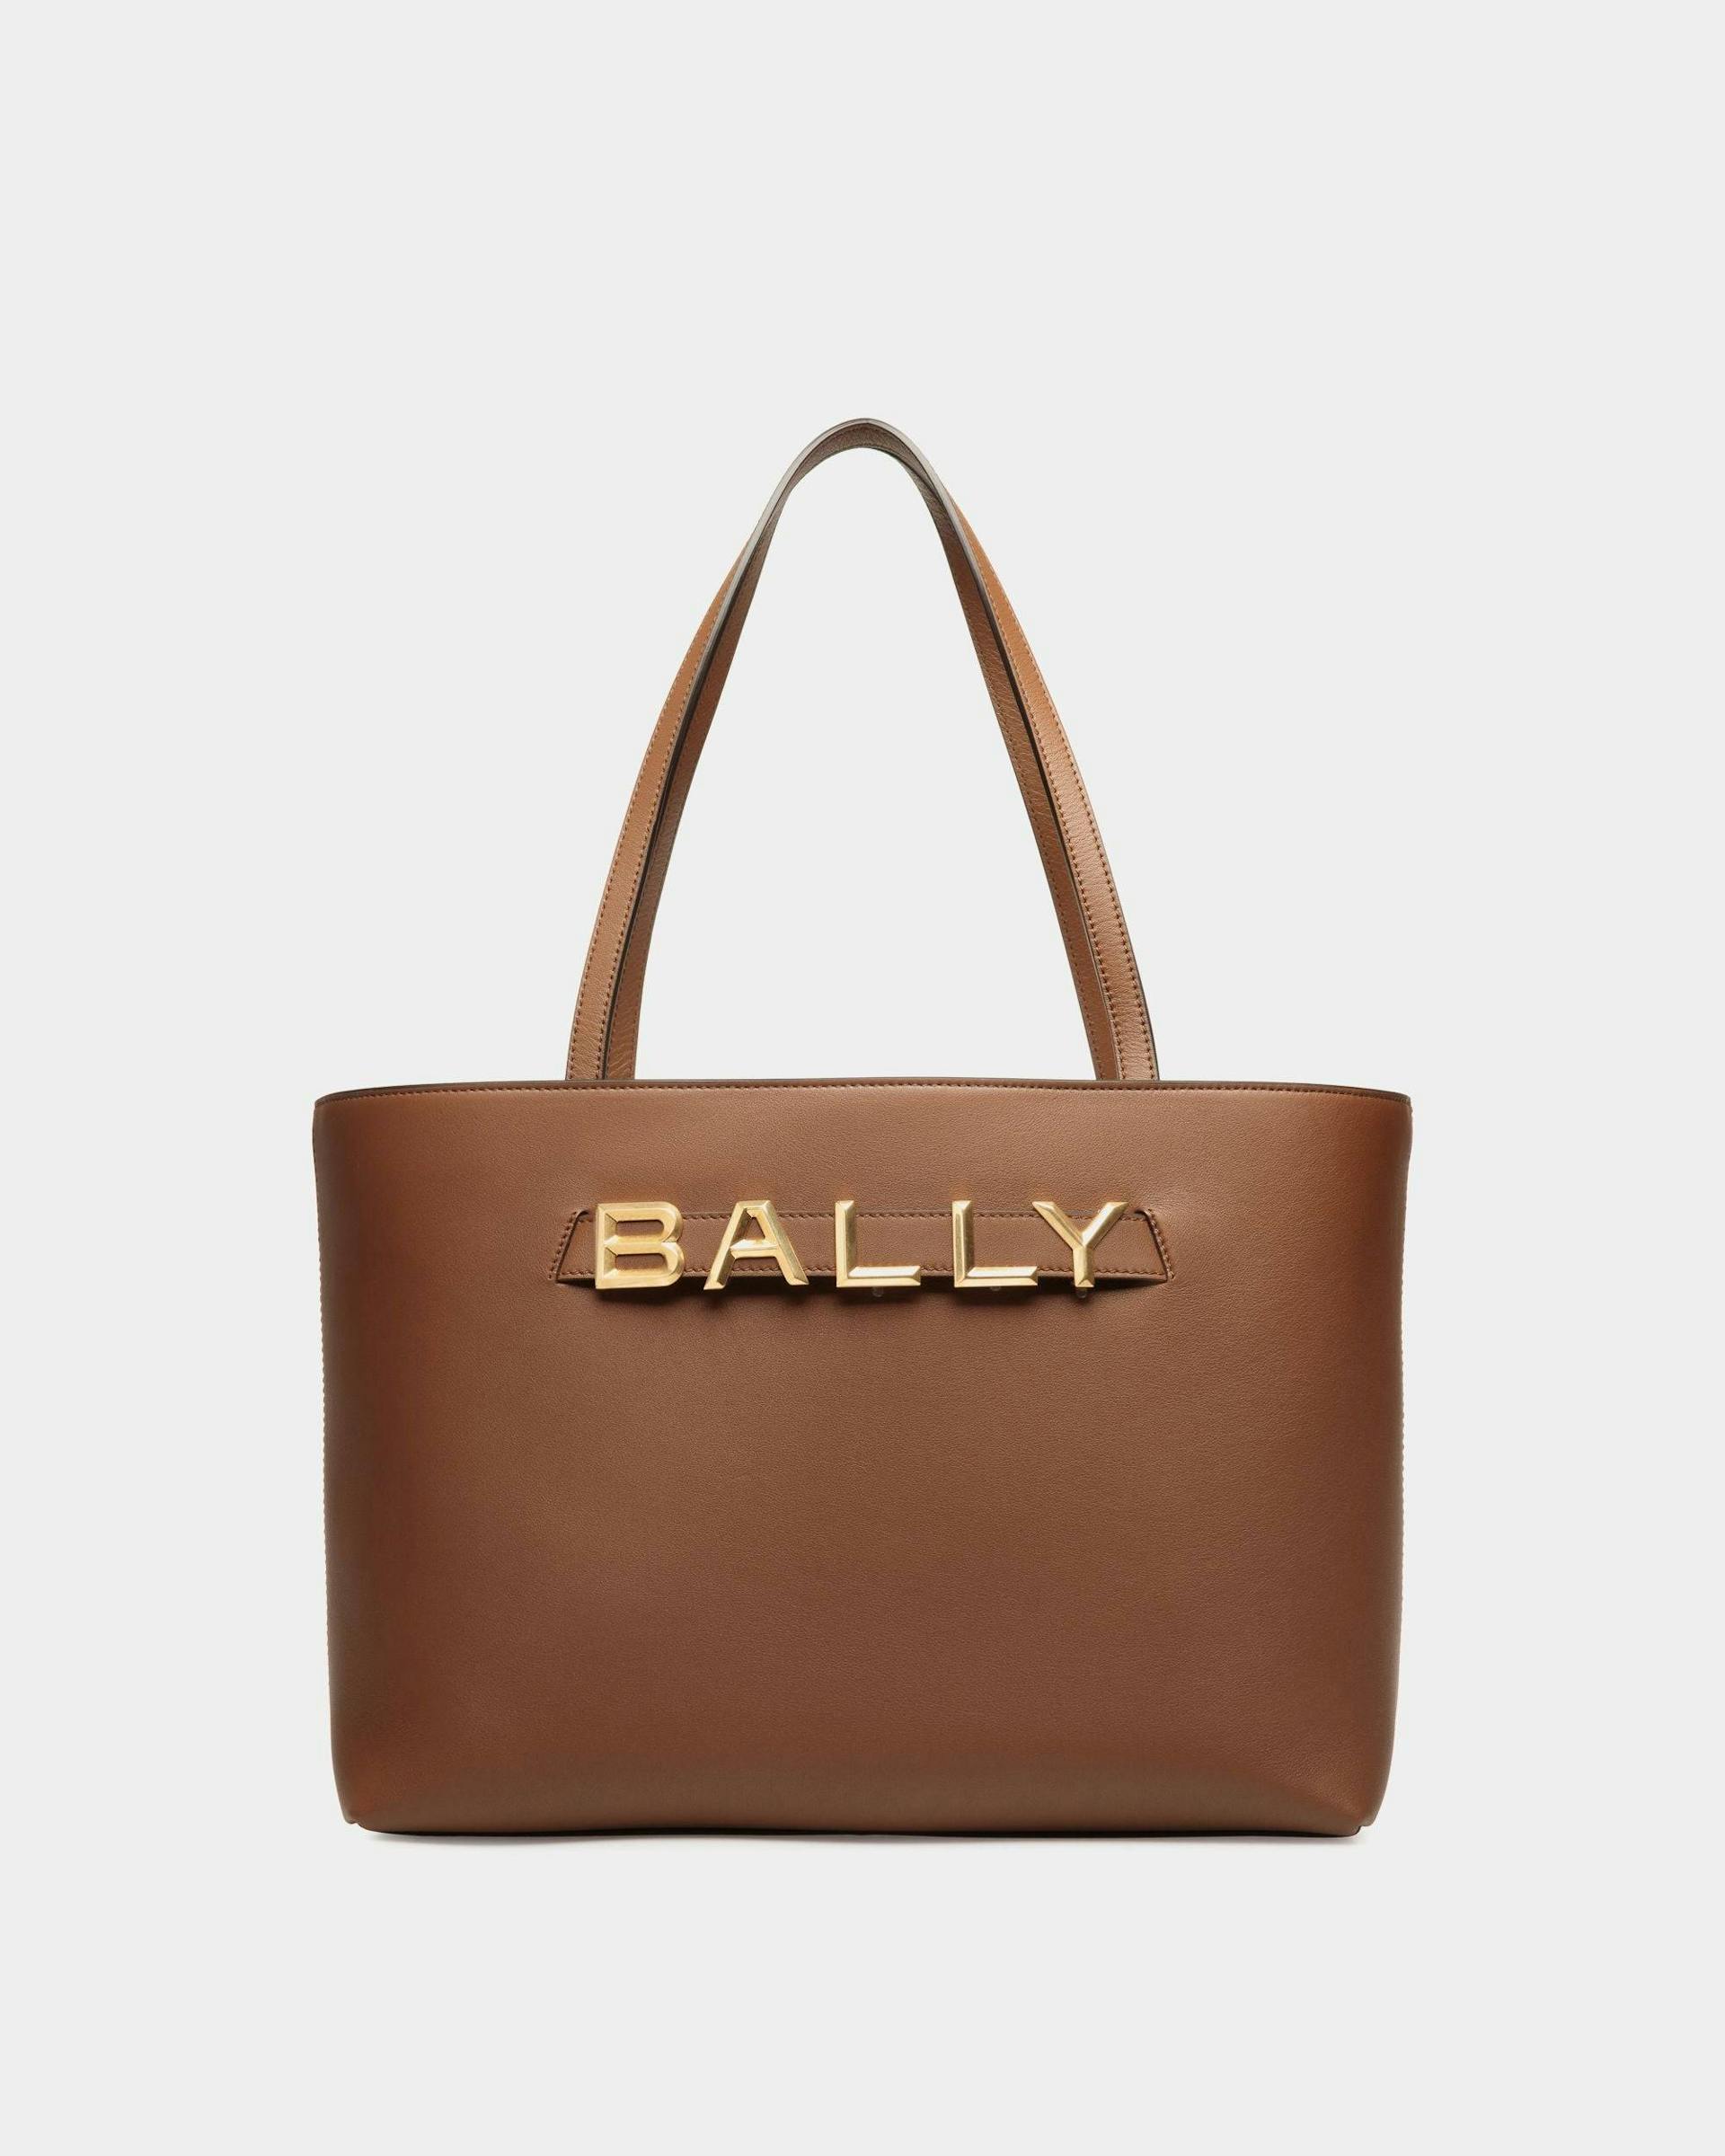 Bally Spell Tote Bag in Brown Leather - Women's - Bally - 01